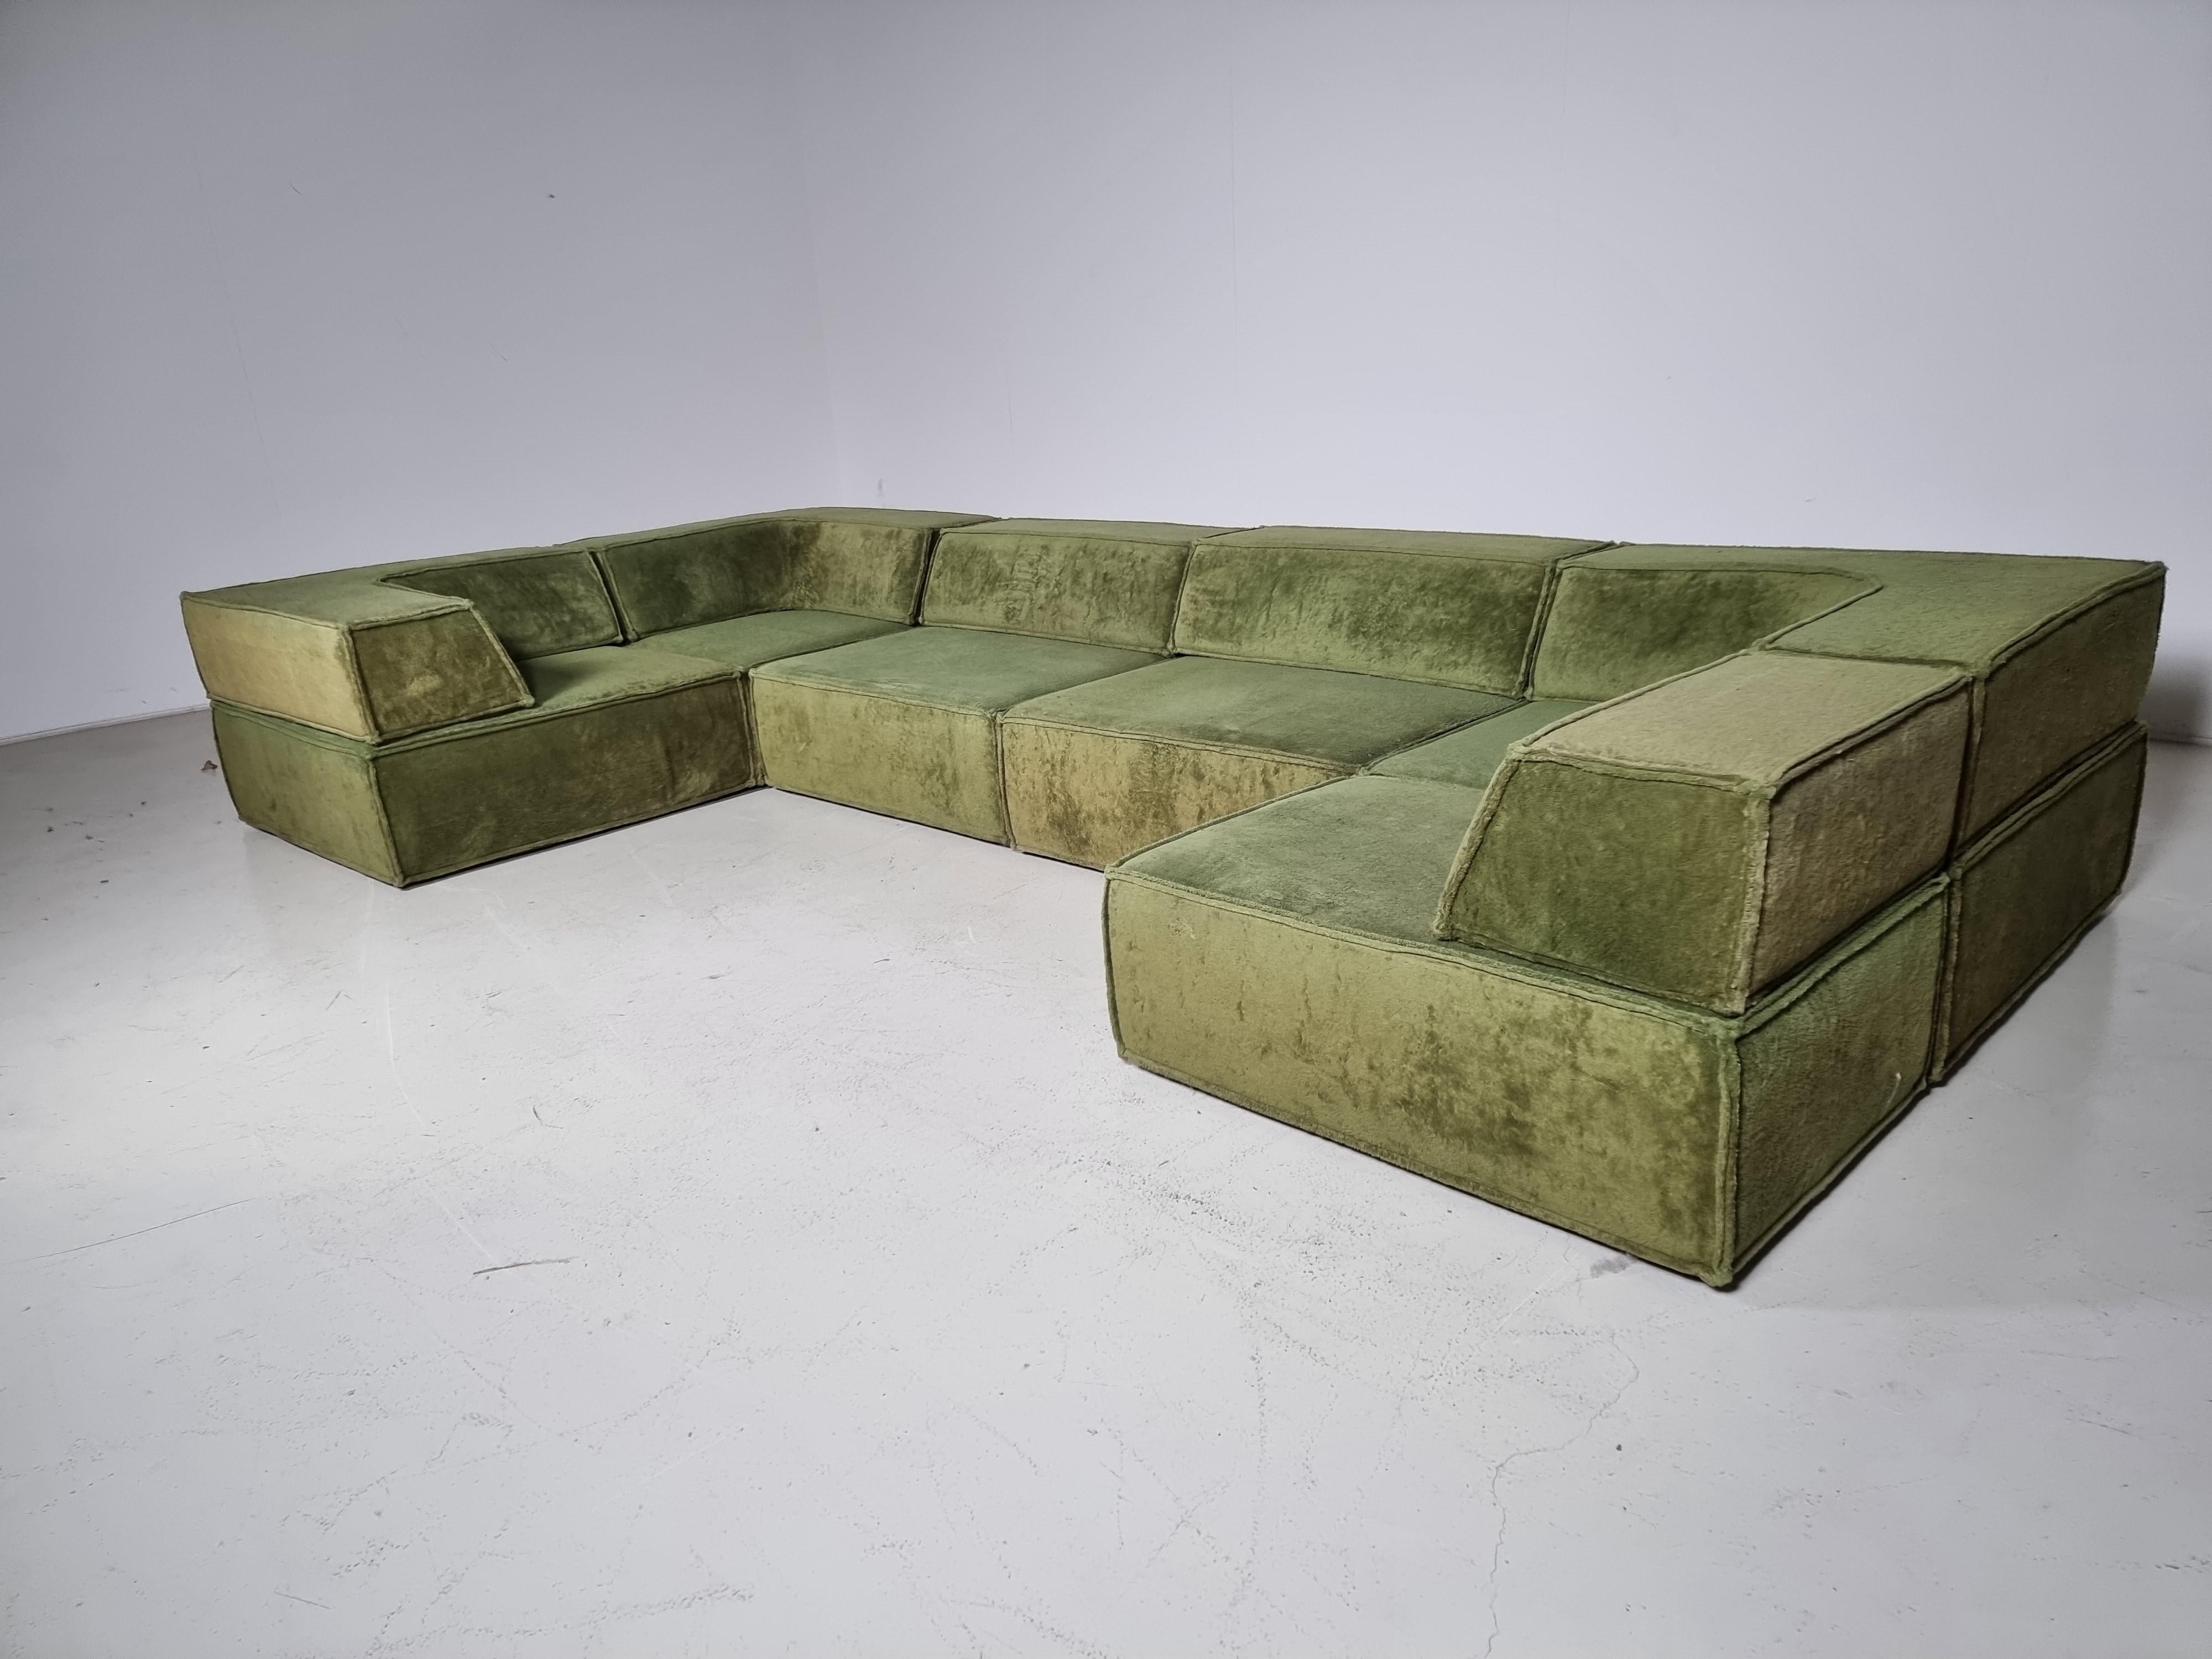 European COR Trio Sofa by Team Form Ag for COR Furniture, Germany, 1970s